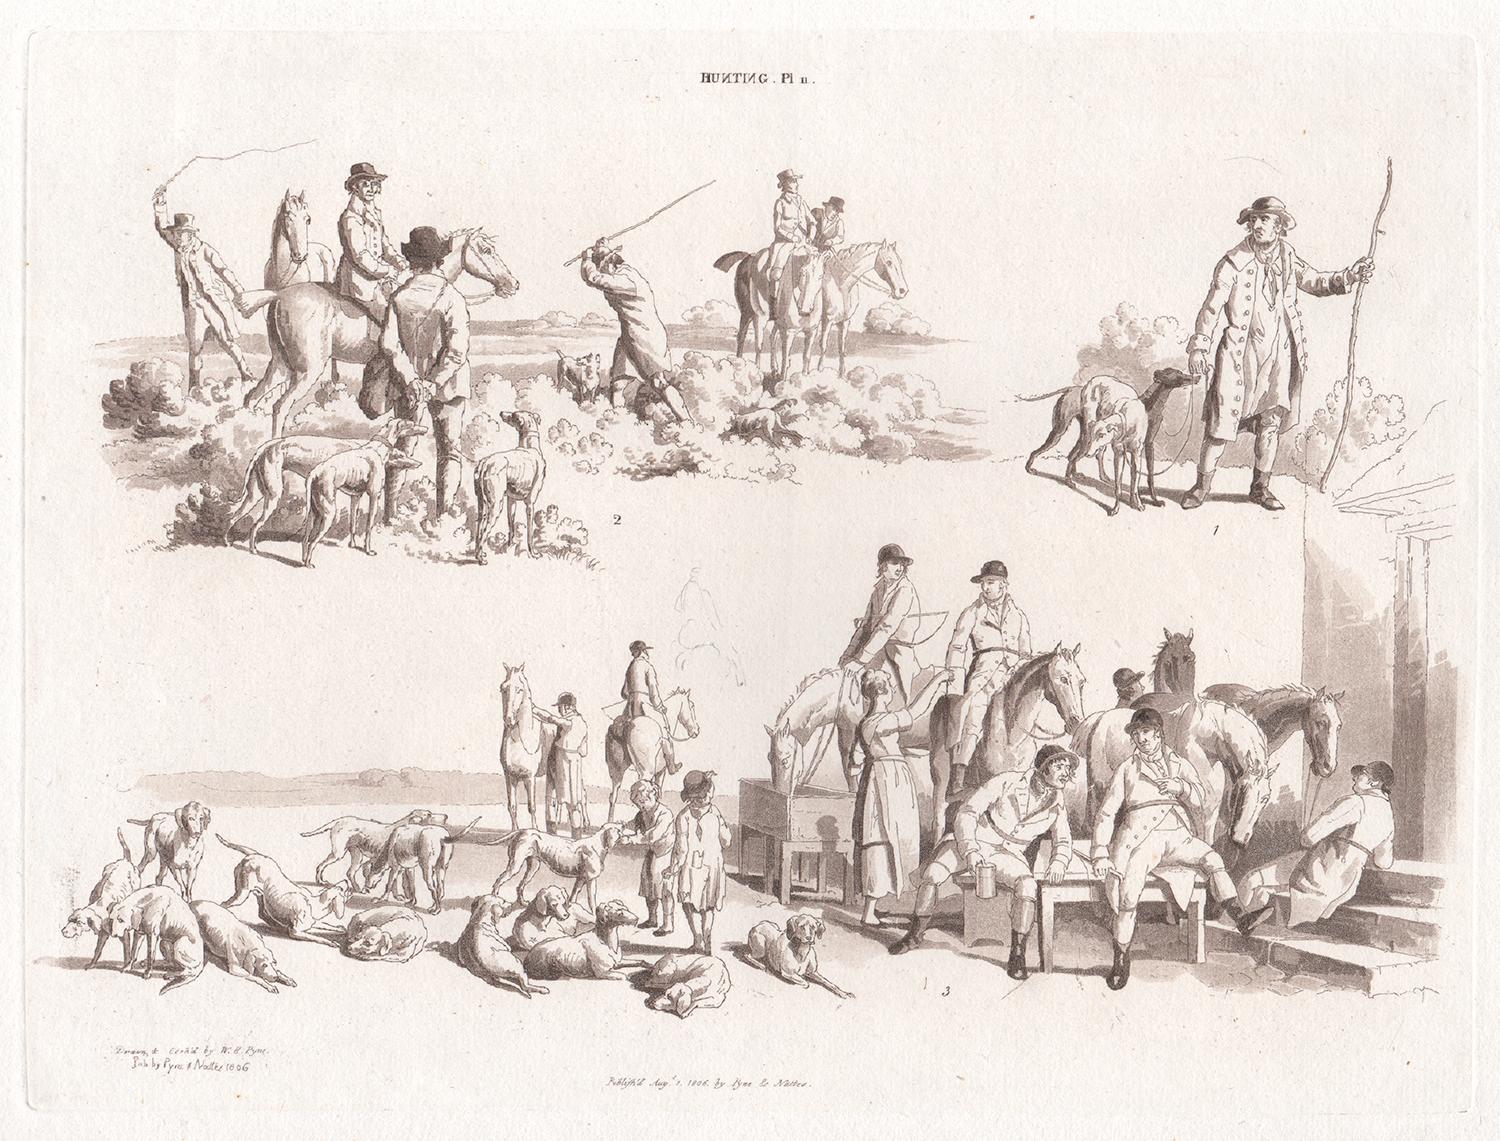 William Henry Pyne Figurative Print - Hunting, early 19th century sepia soft ground etching, 1805